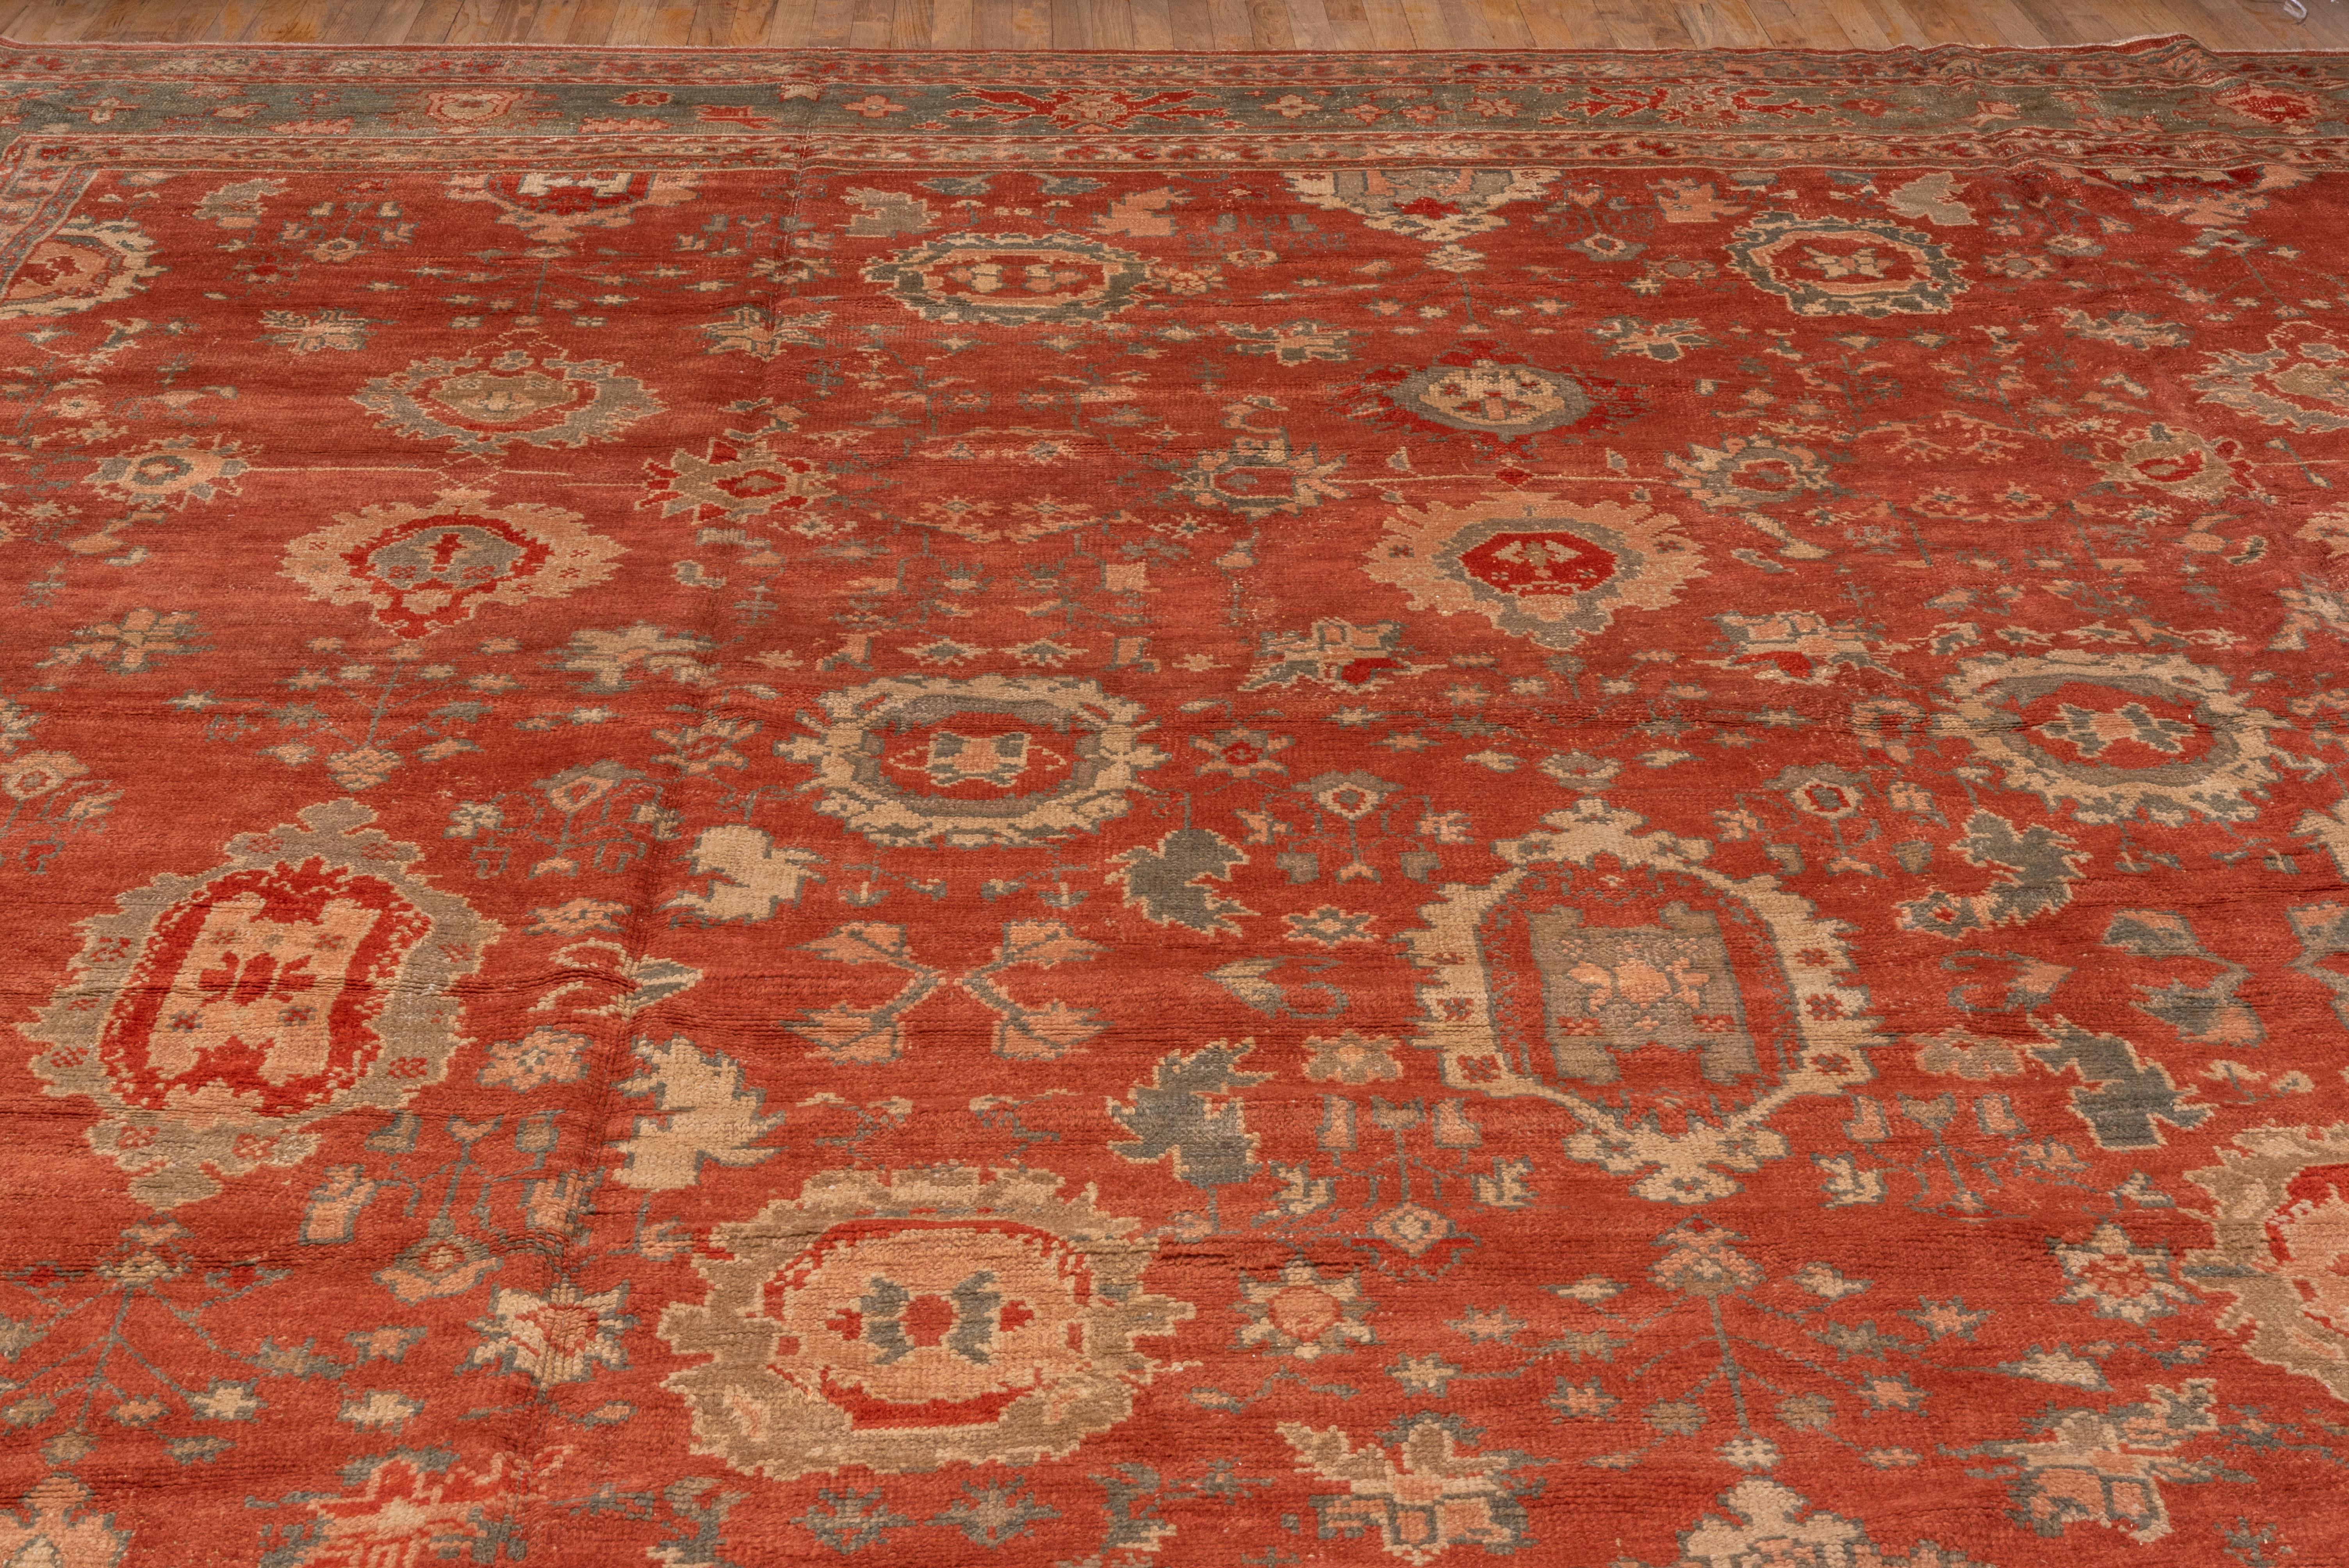 1900s Rare Antique Turkish Oushak Carpet, Rusty Red Allover Field, Green Borders For Sale 2